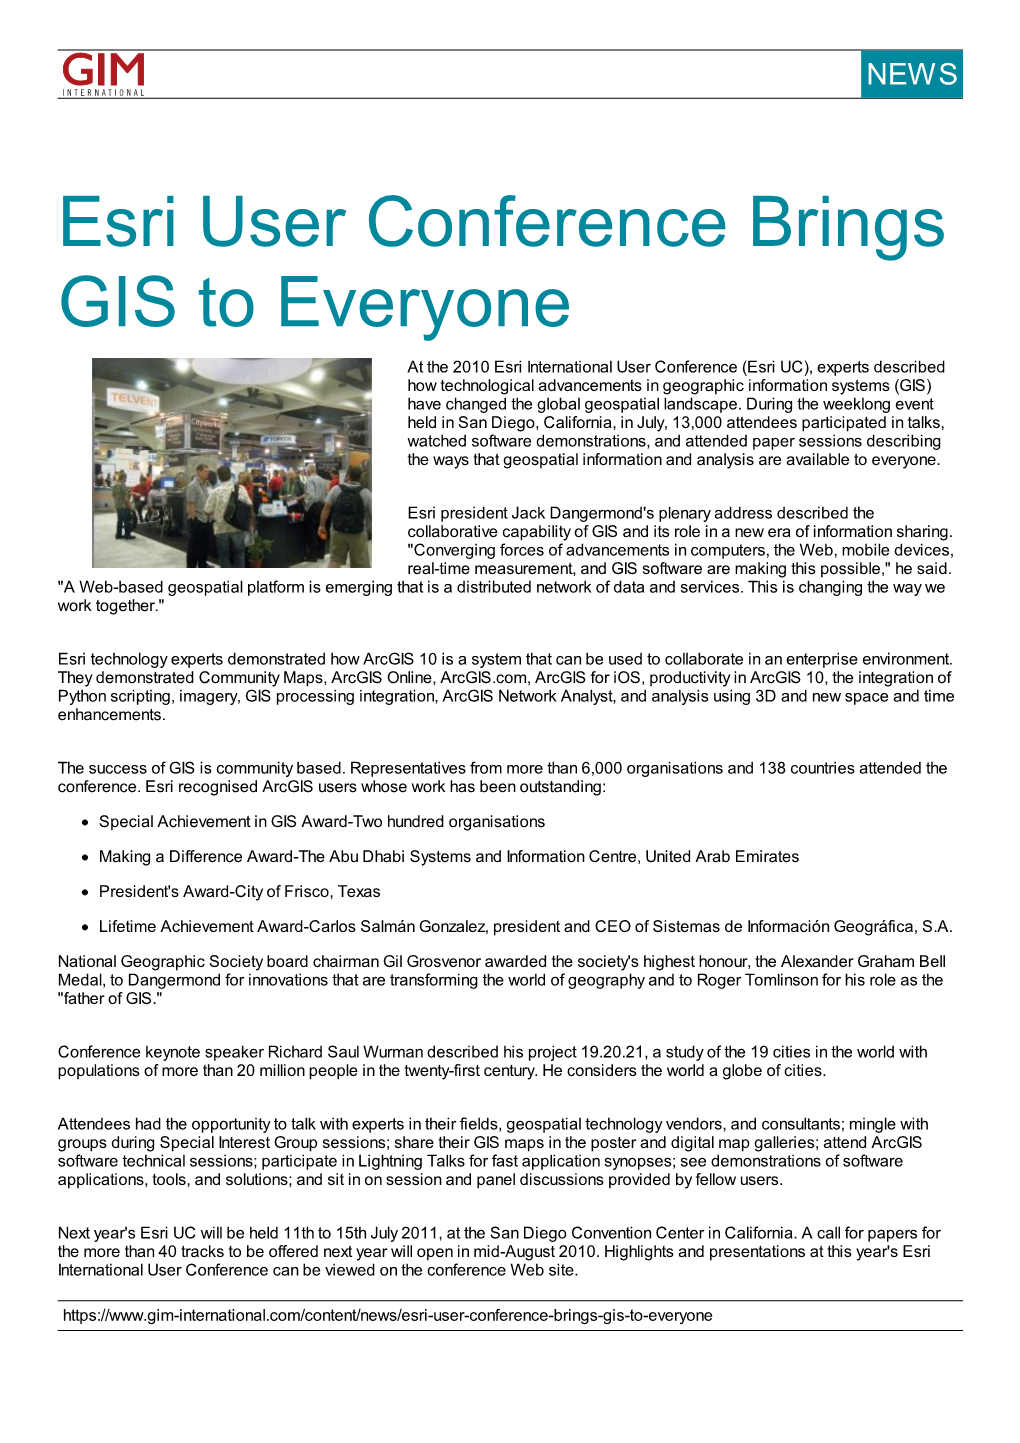 Esri User Conference Brings GIS to Everyone